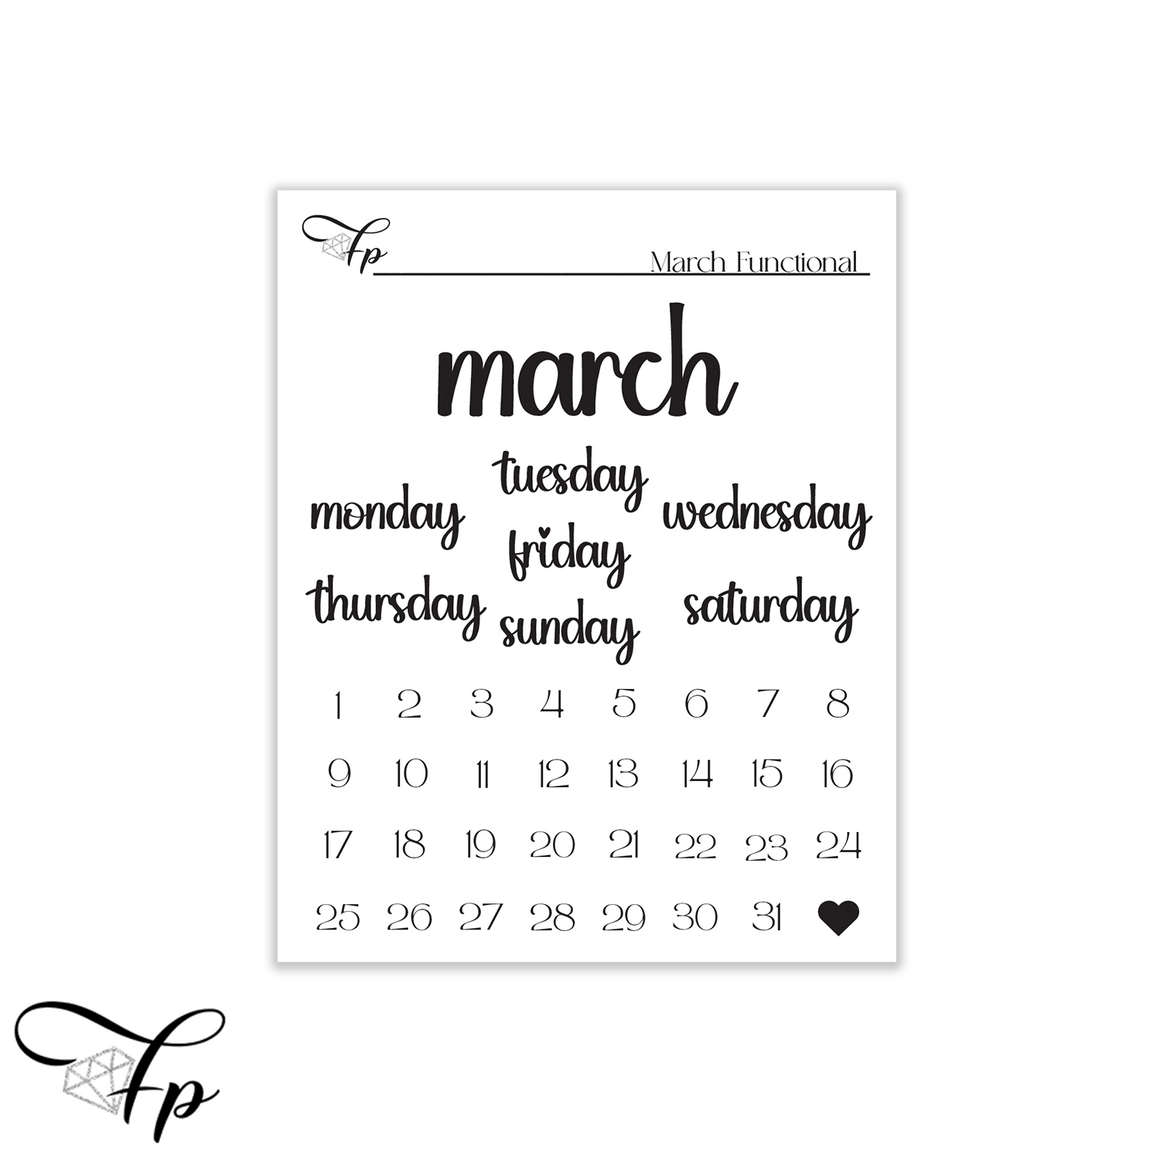 March Functional